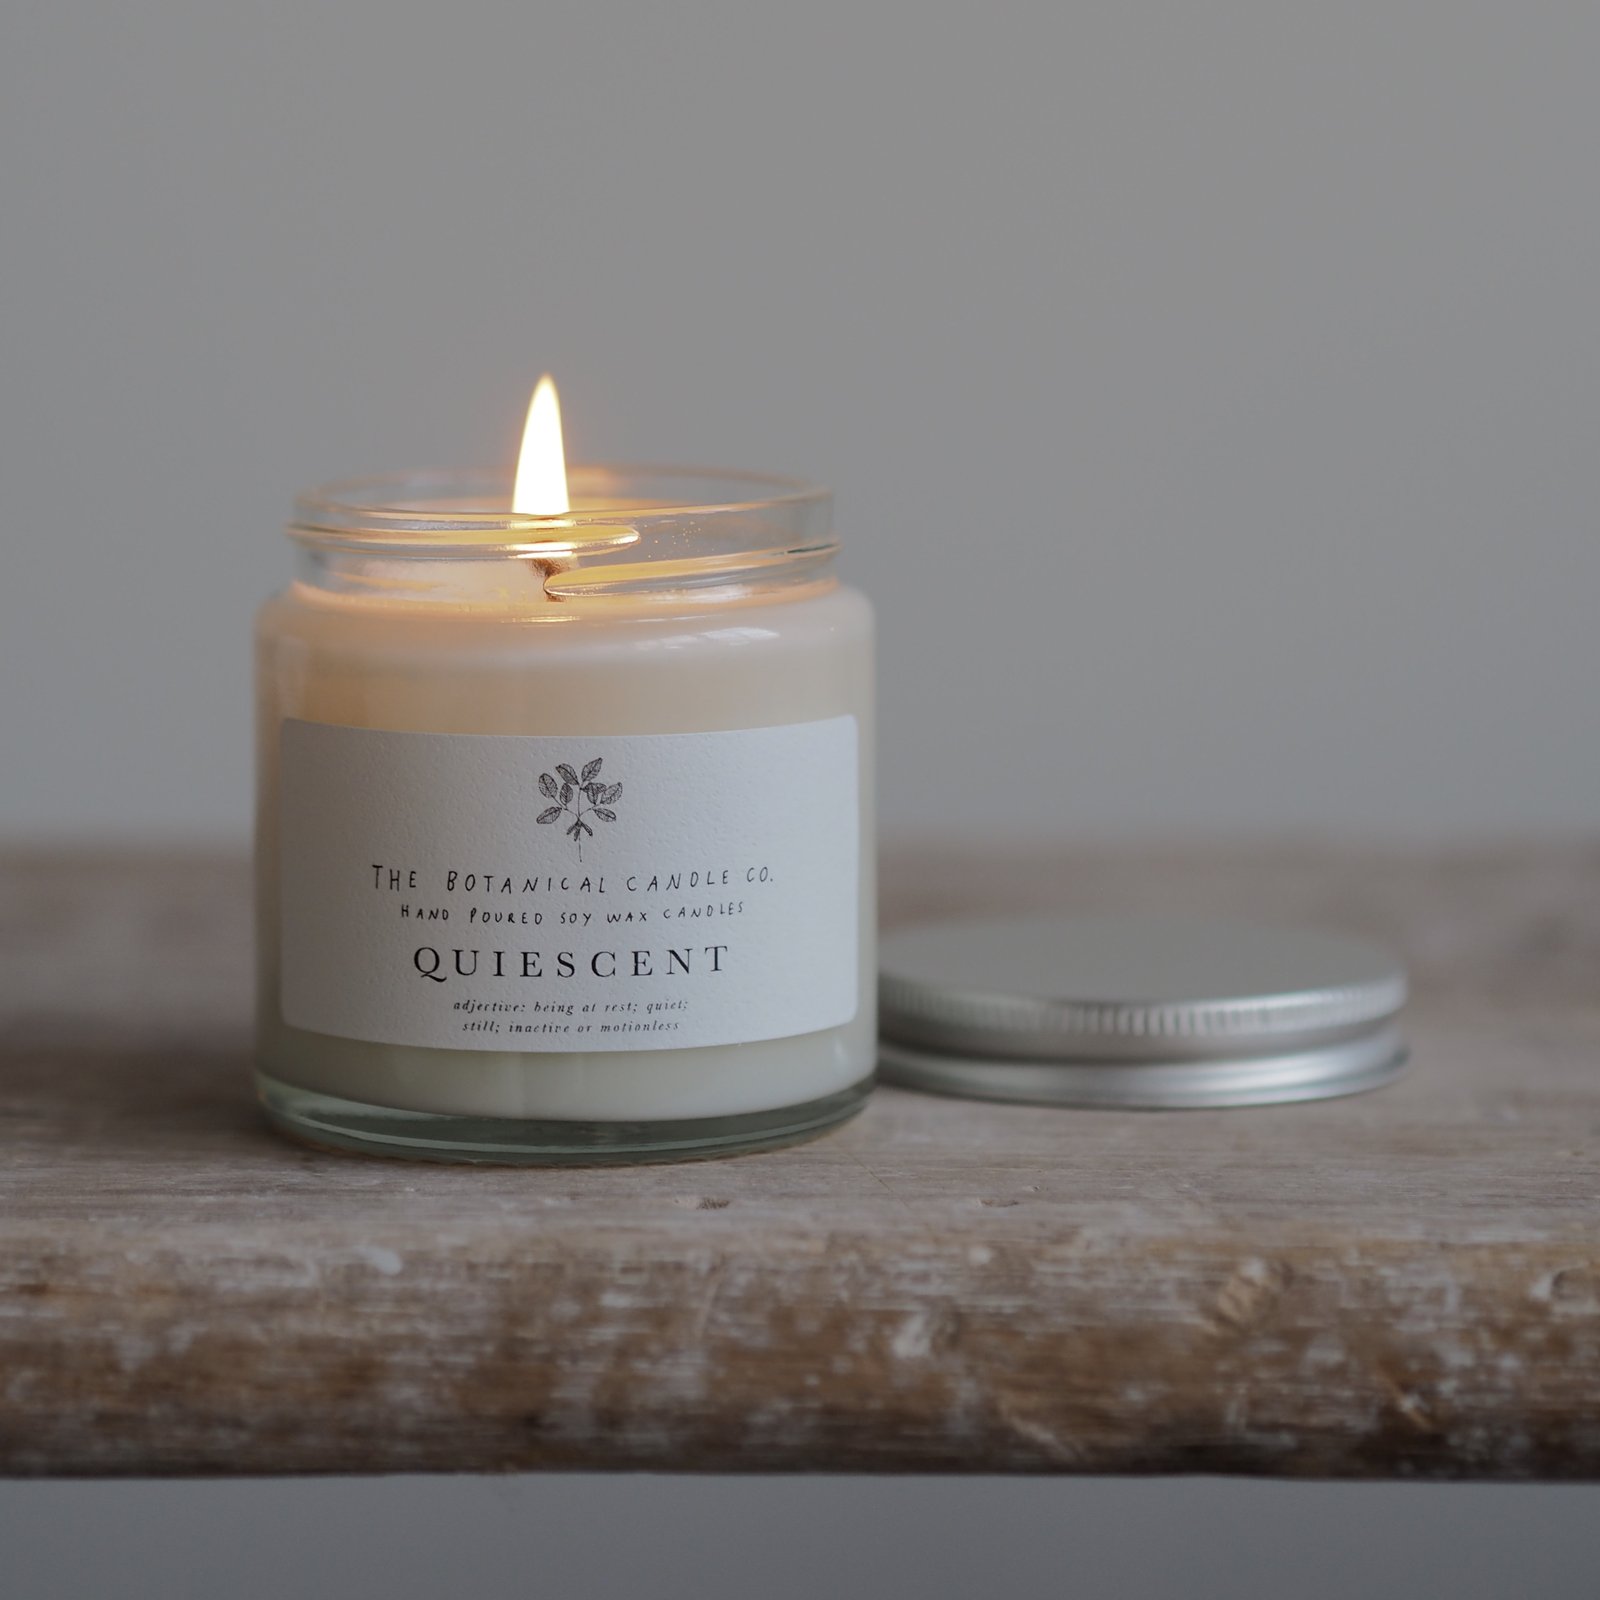 The Botanical Candle Company The Botanical Candle Co Quiescent Candle